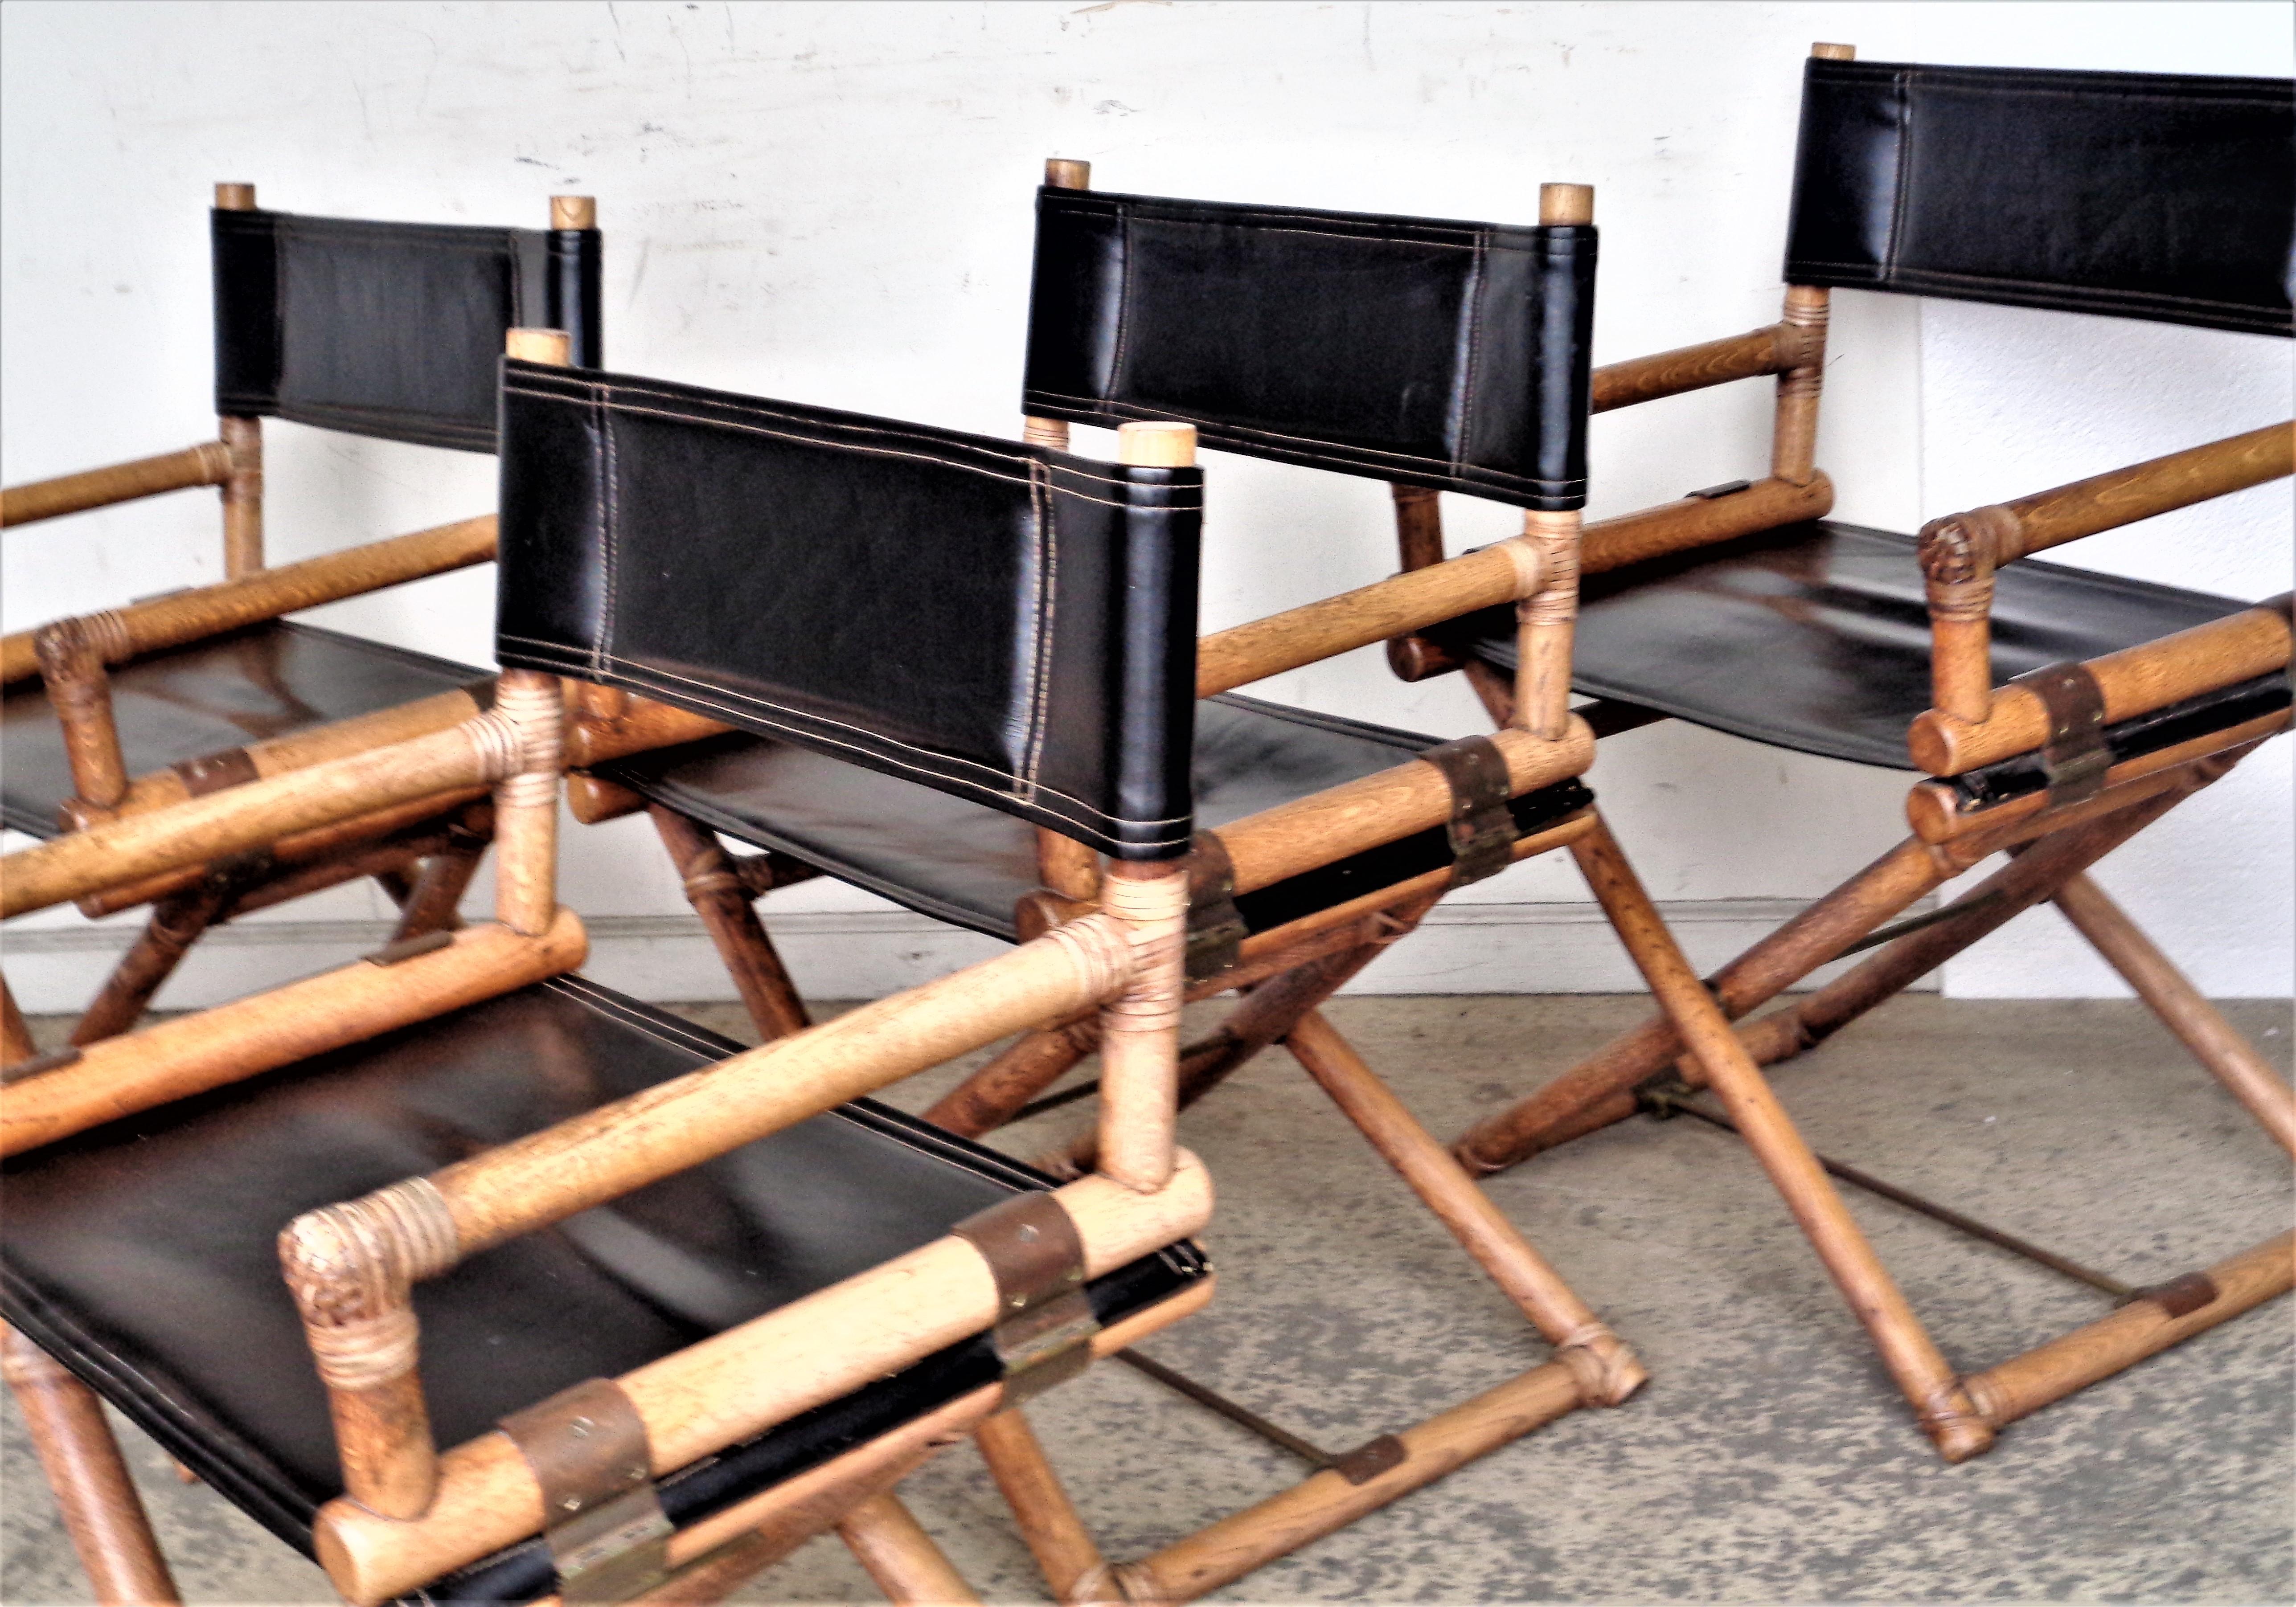 Set of four McGuire campaign style director's x-chairs with oak frames, rawhide leather bindings, brass fittings, high quality black vinyl seats and backs. Overall beautifully aged original surface color patina ( wood has not been refinished or the